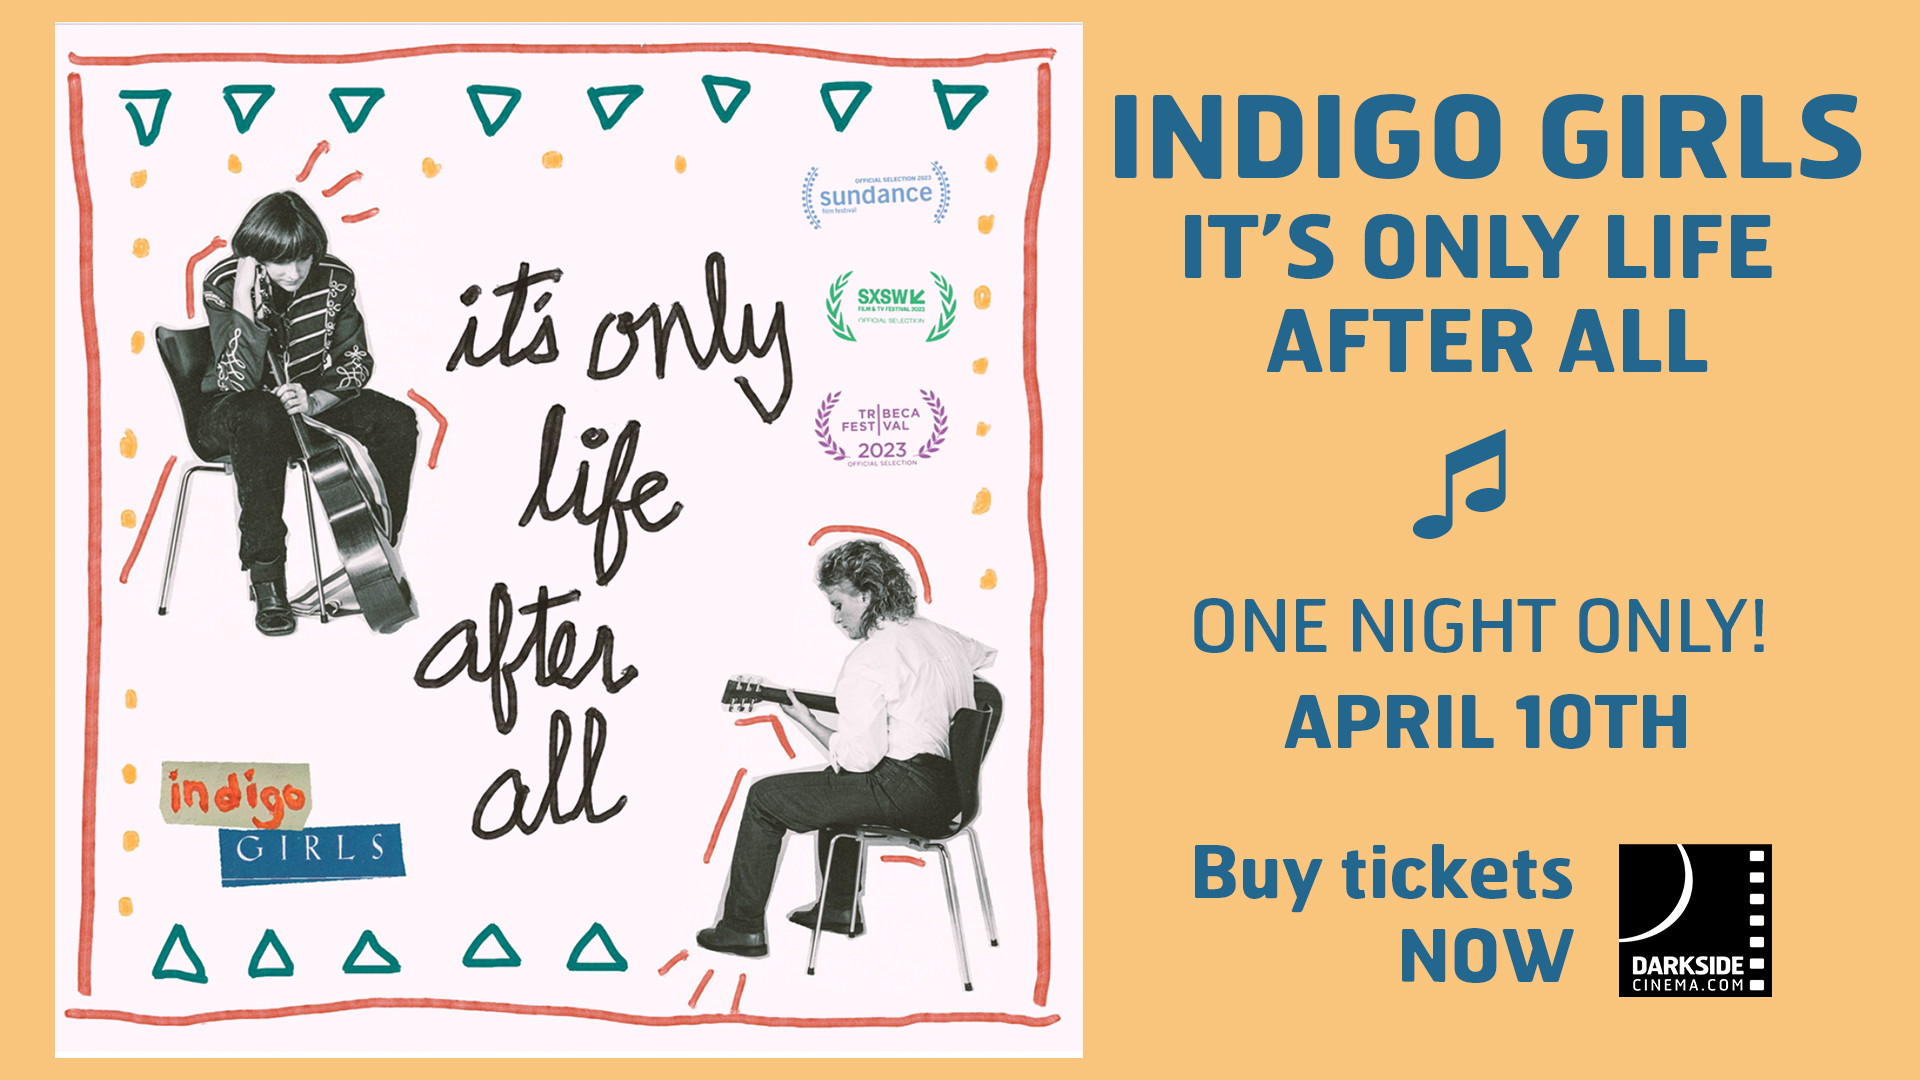 INDIGO GIRLS: IT'S ONLY LIFE AFTER ALL